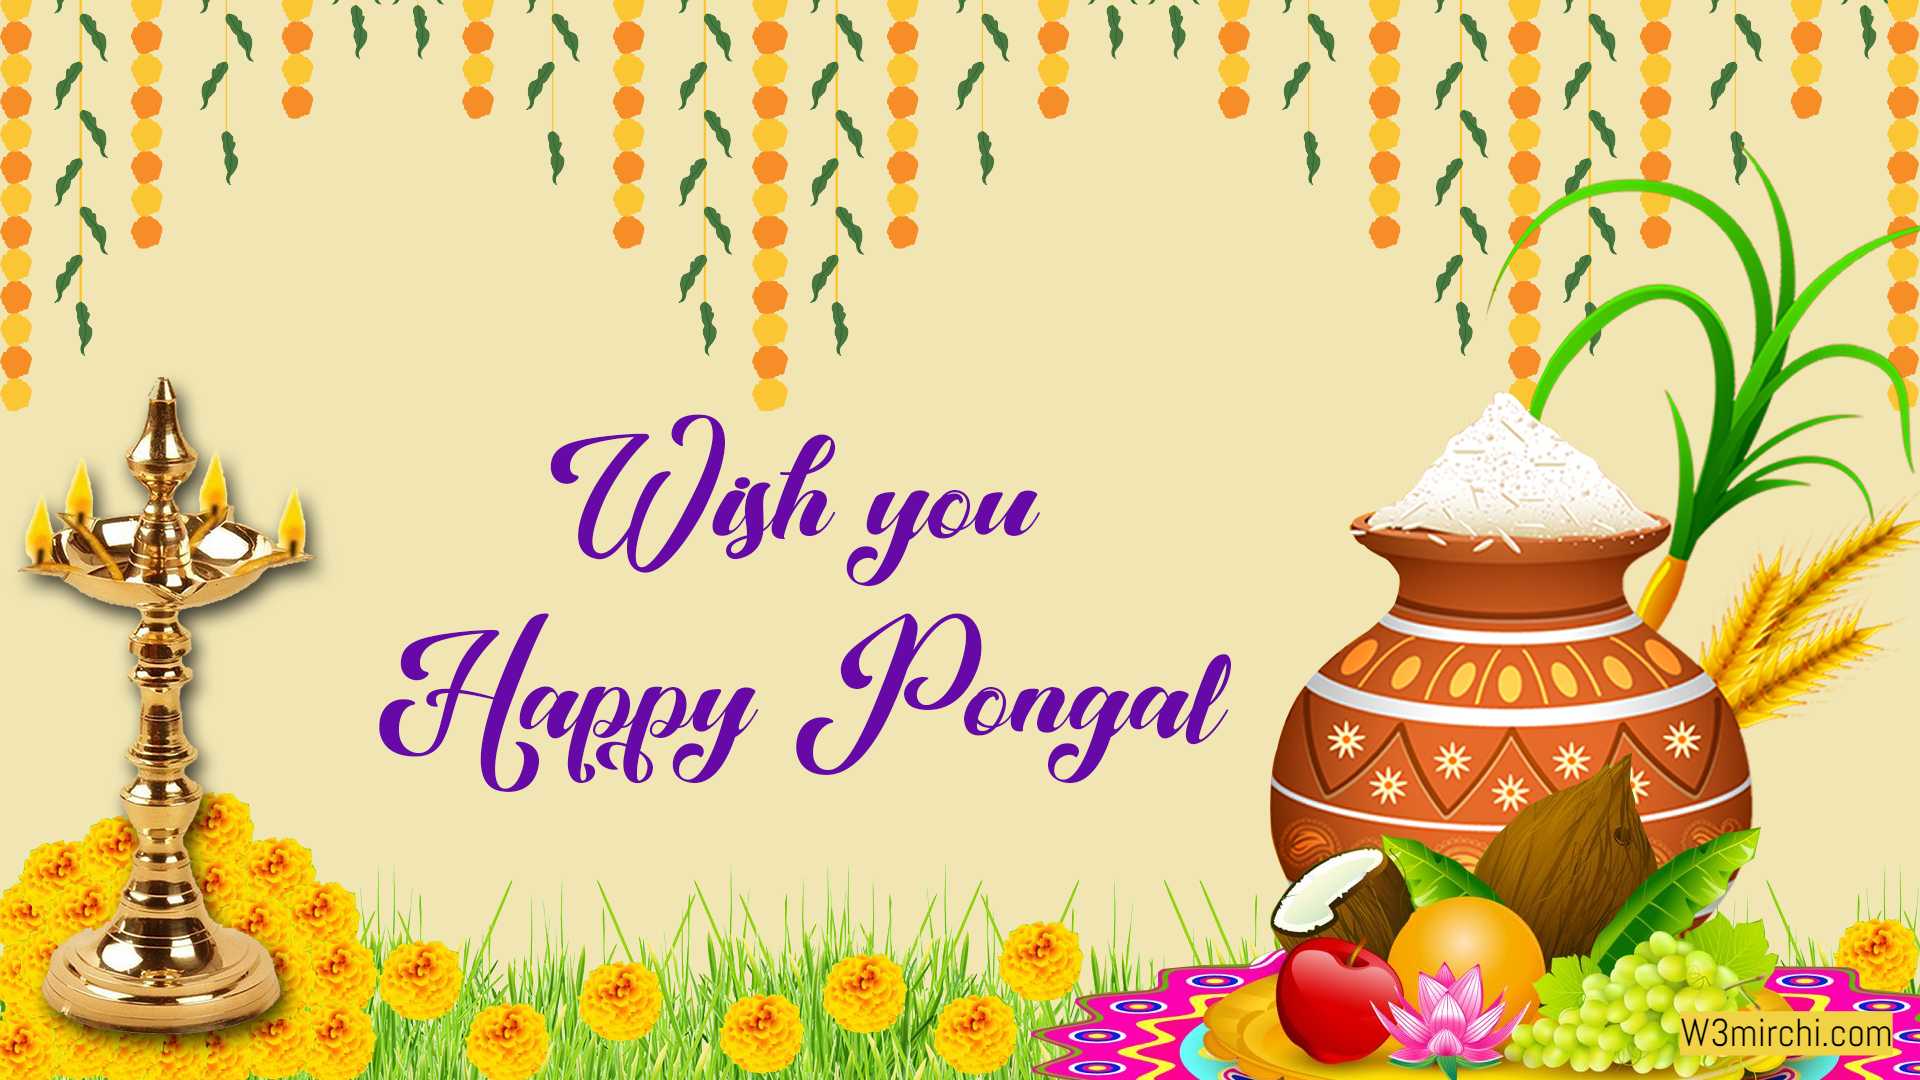 Happy Pongal images